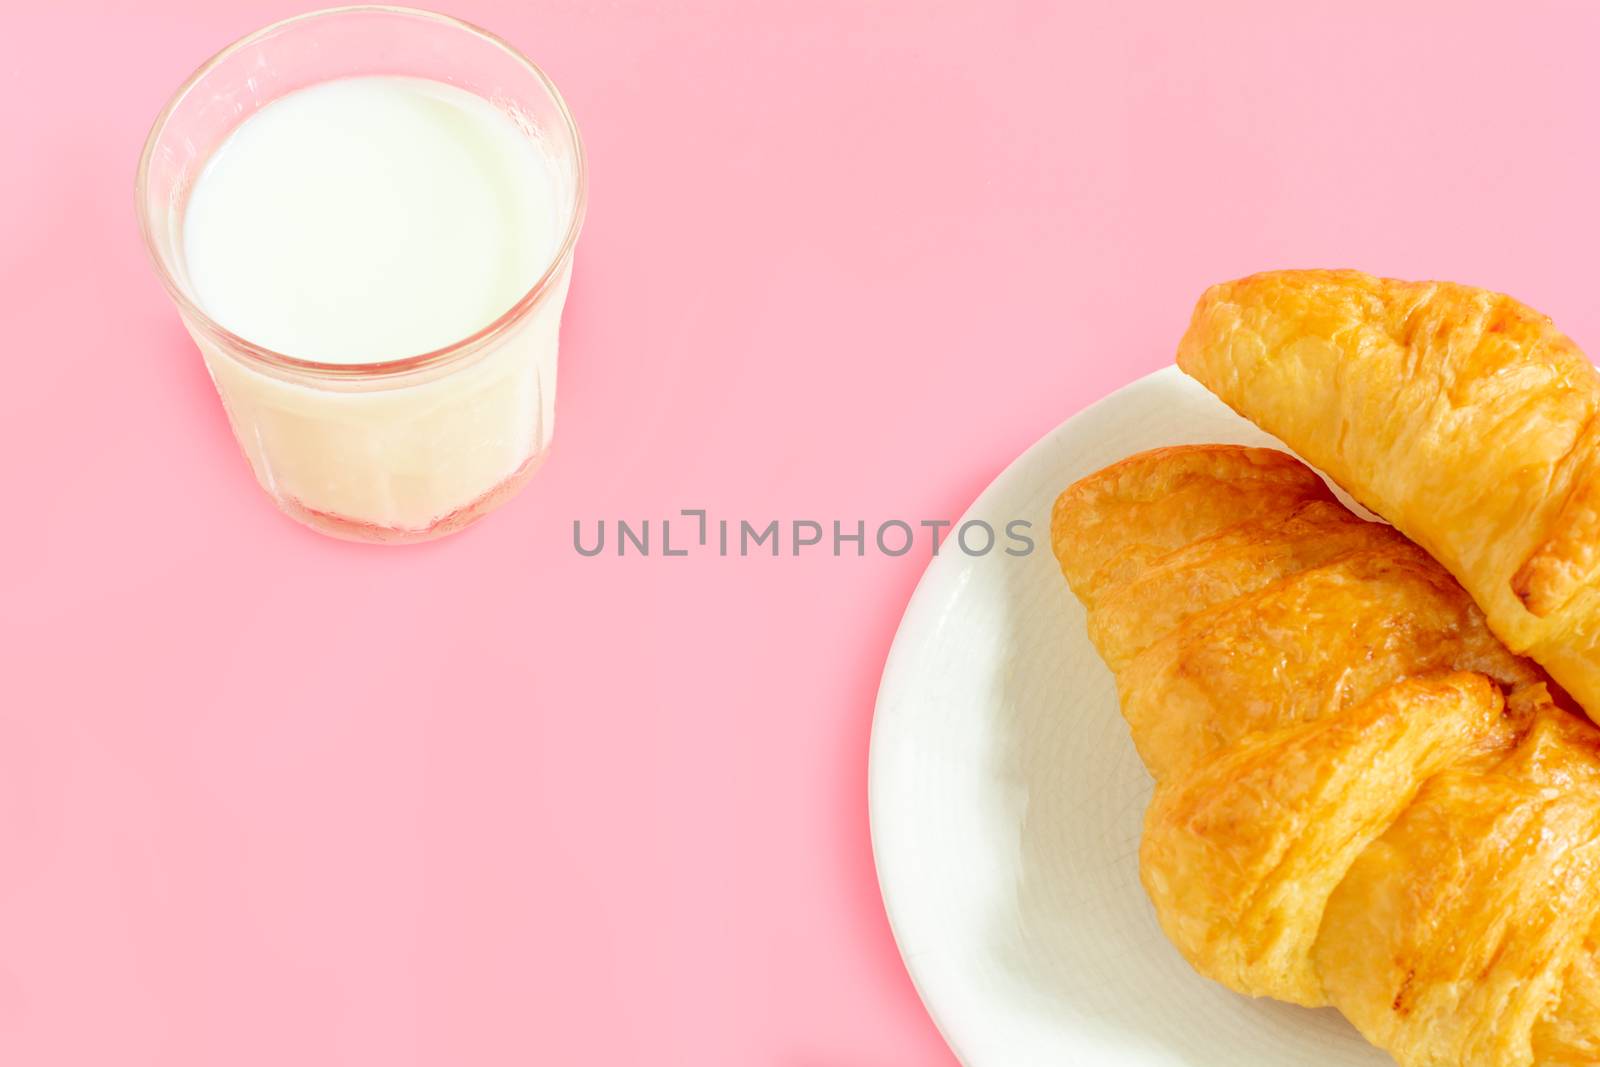 Two croissants on white dish and glass of fresh milk on pink back ground with copy space for your text. Breakfast concept.